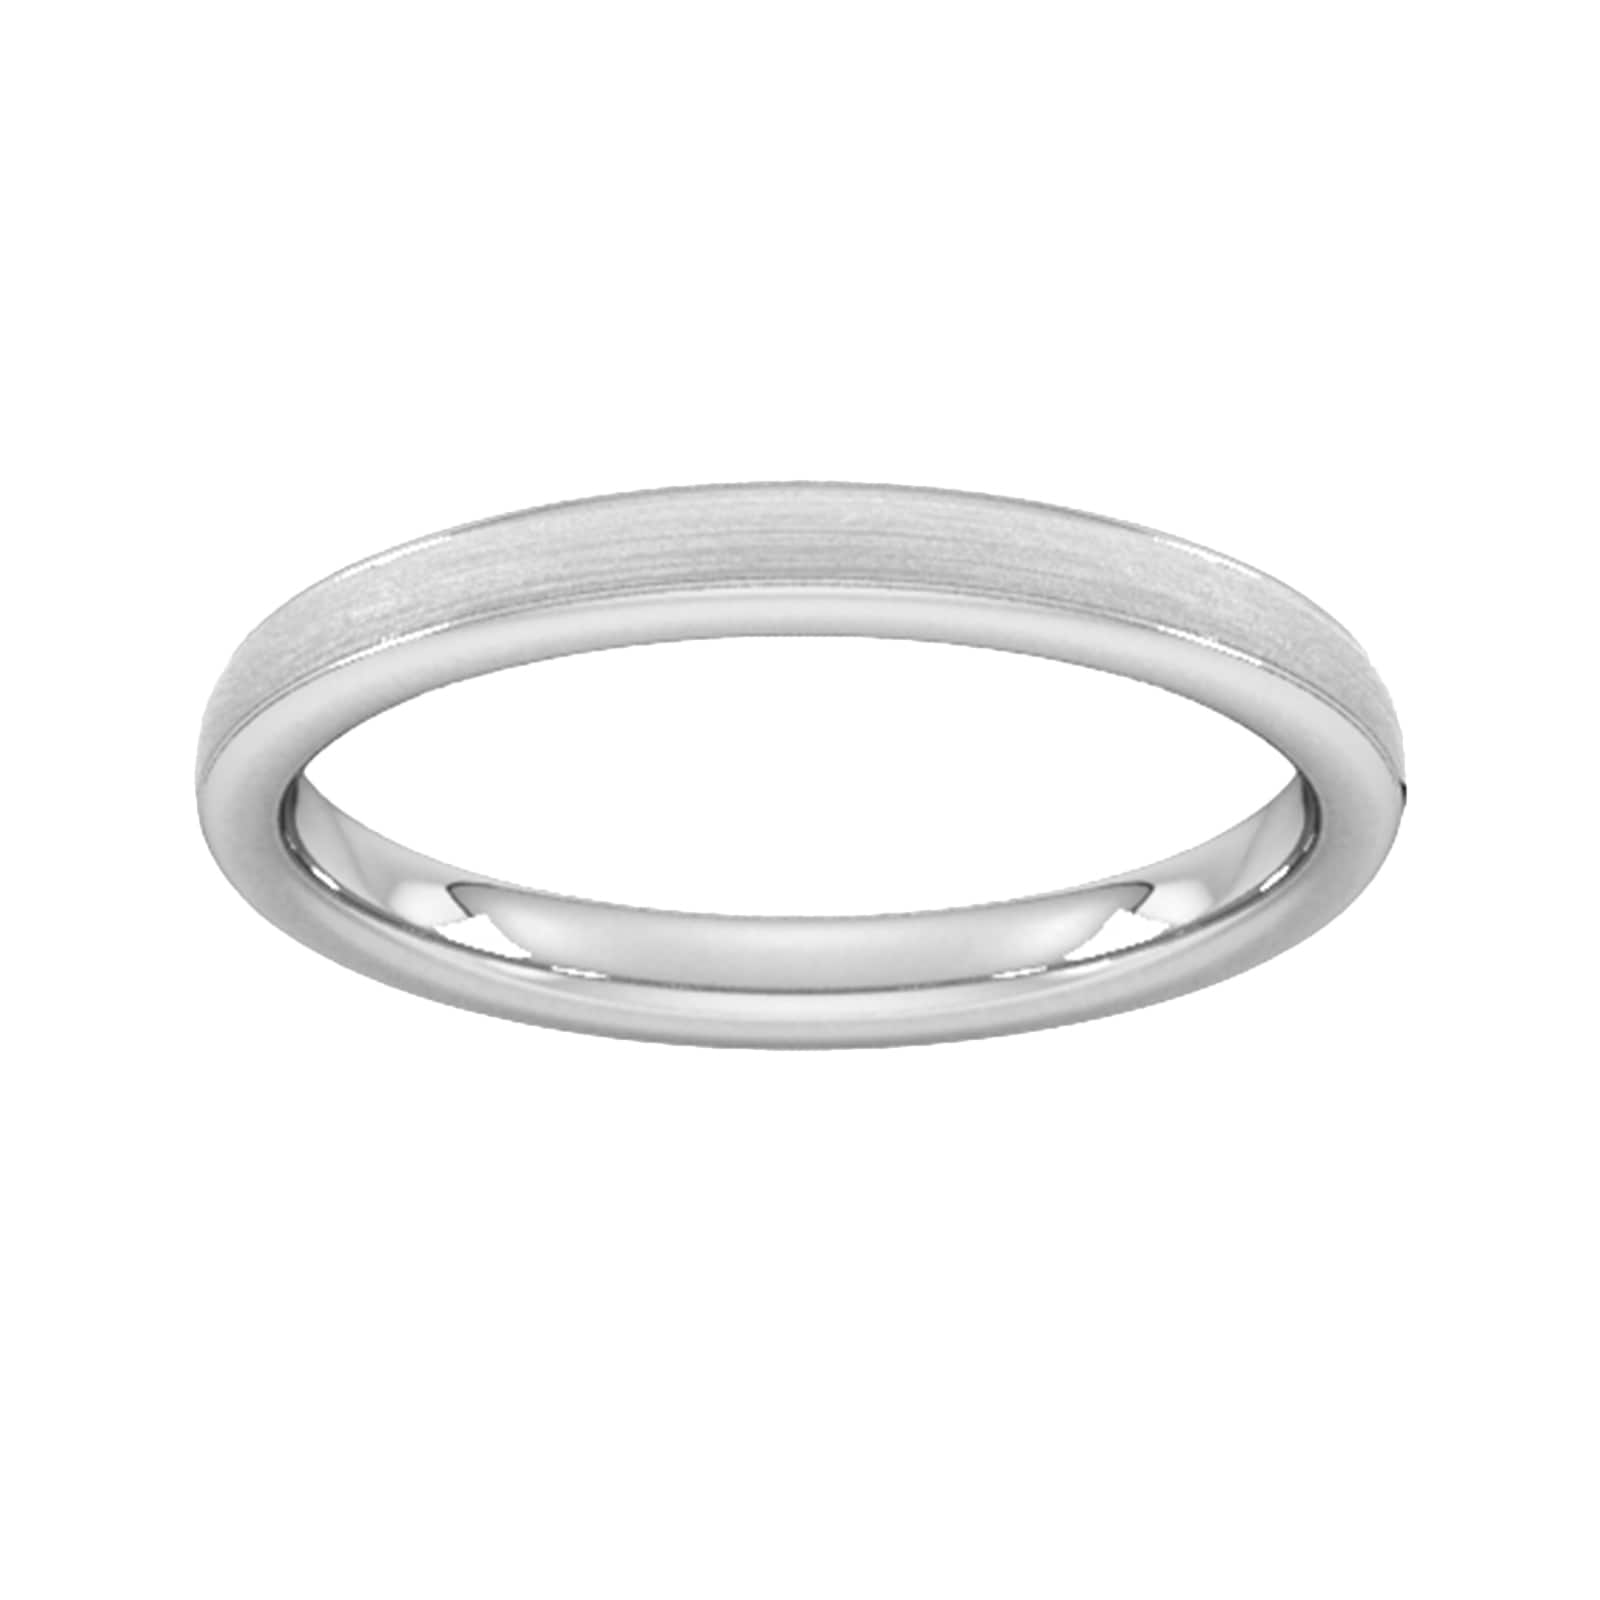 2.5mm D Shape Heavy Matt Centre With Grooves Wedding Ring In 18 Carat White Gold - Ring Size P